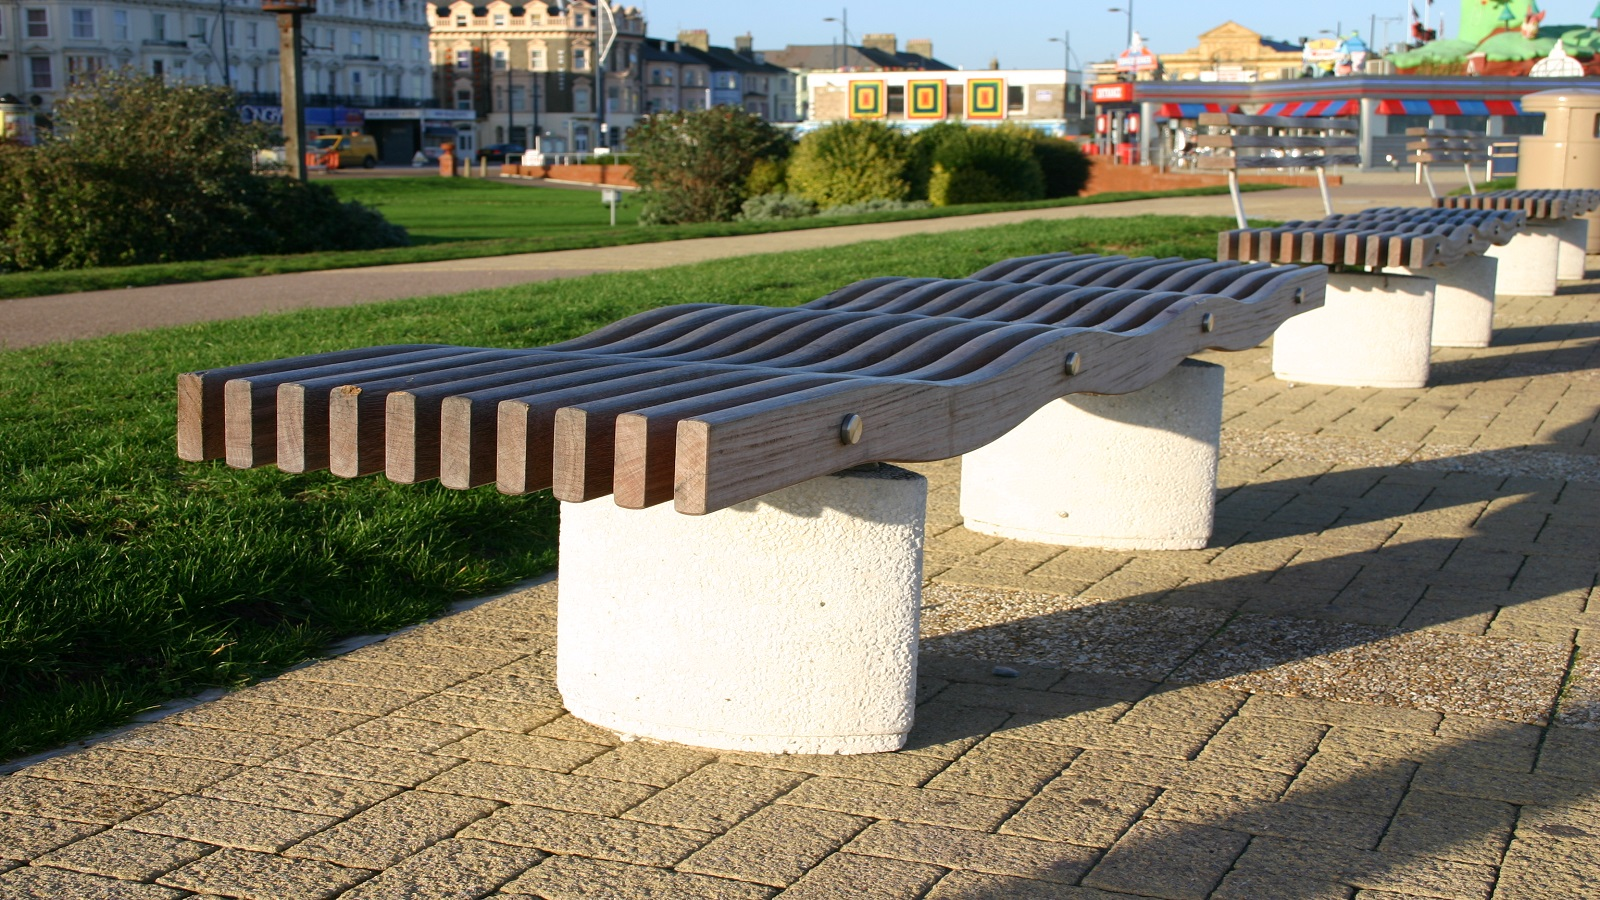 Frequently Asked Questions About Hostile Architecture